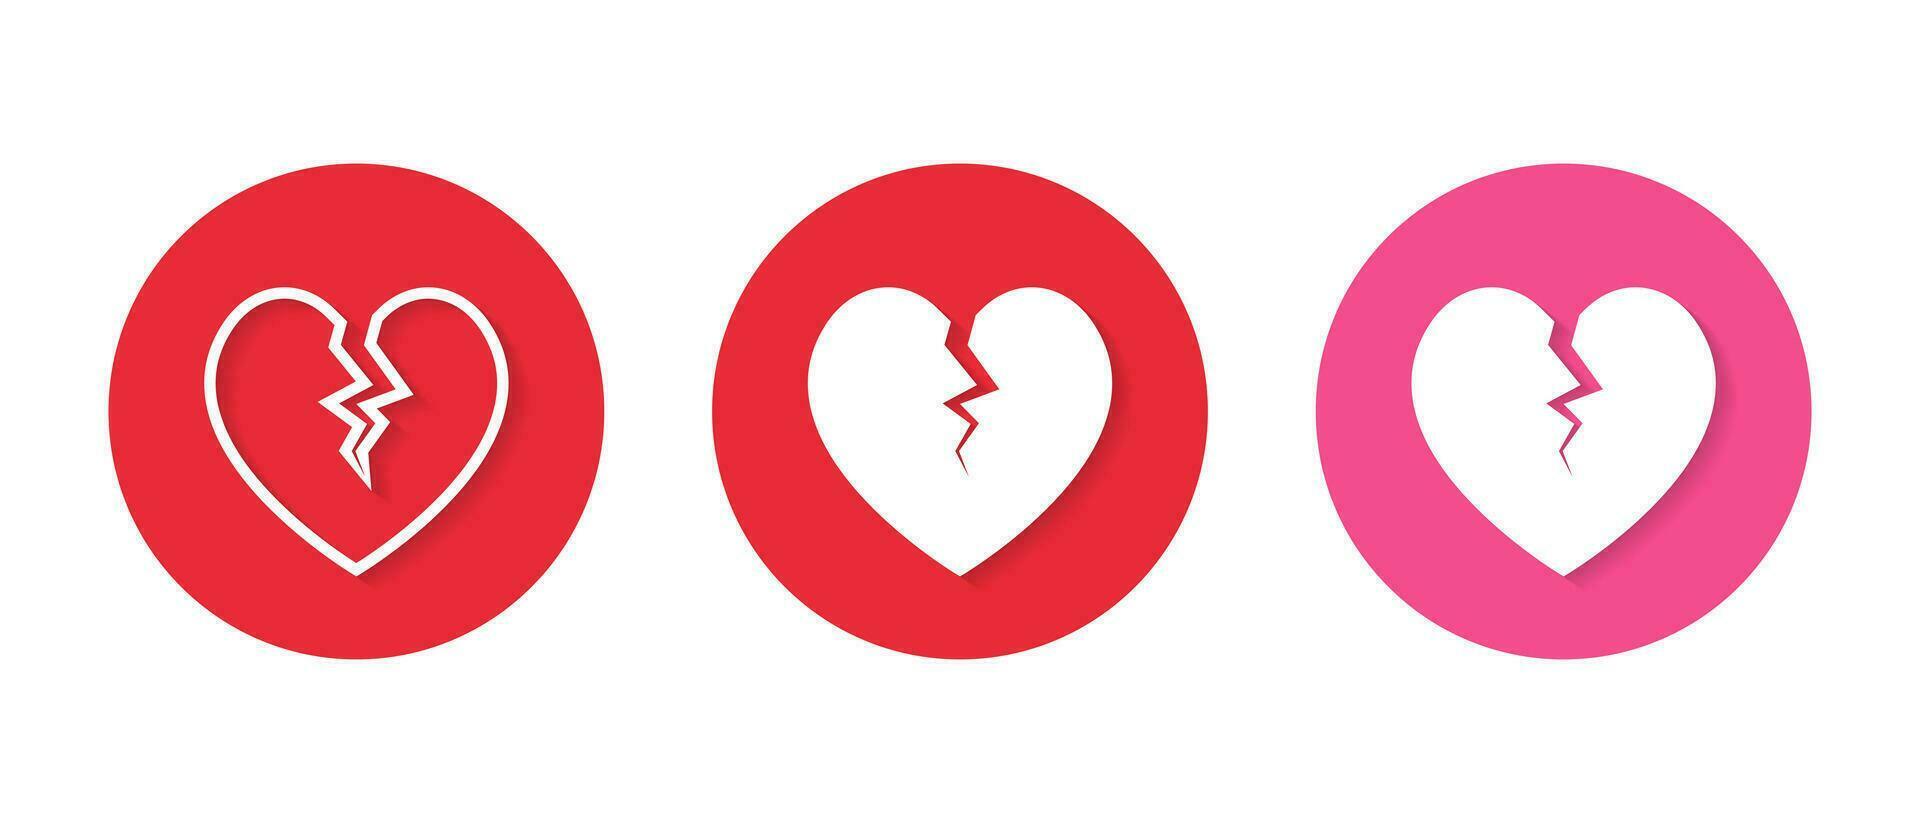 Broken heart, cracked love icon vector in red circle. Relationship conflict, divorce sign symbol